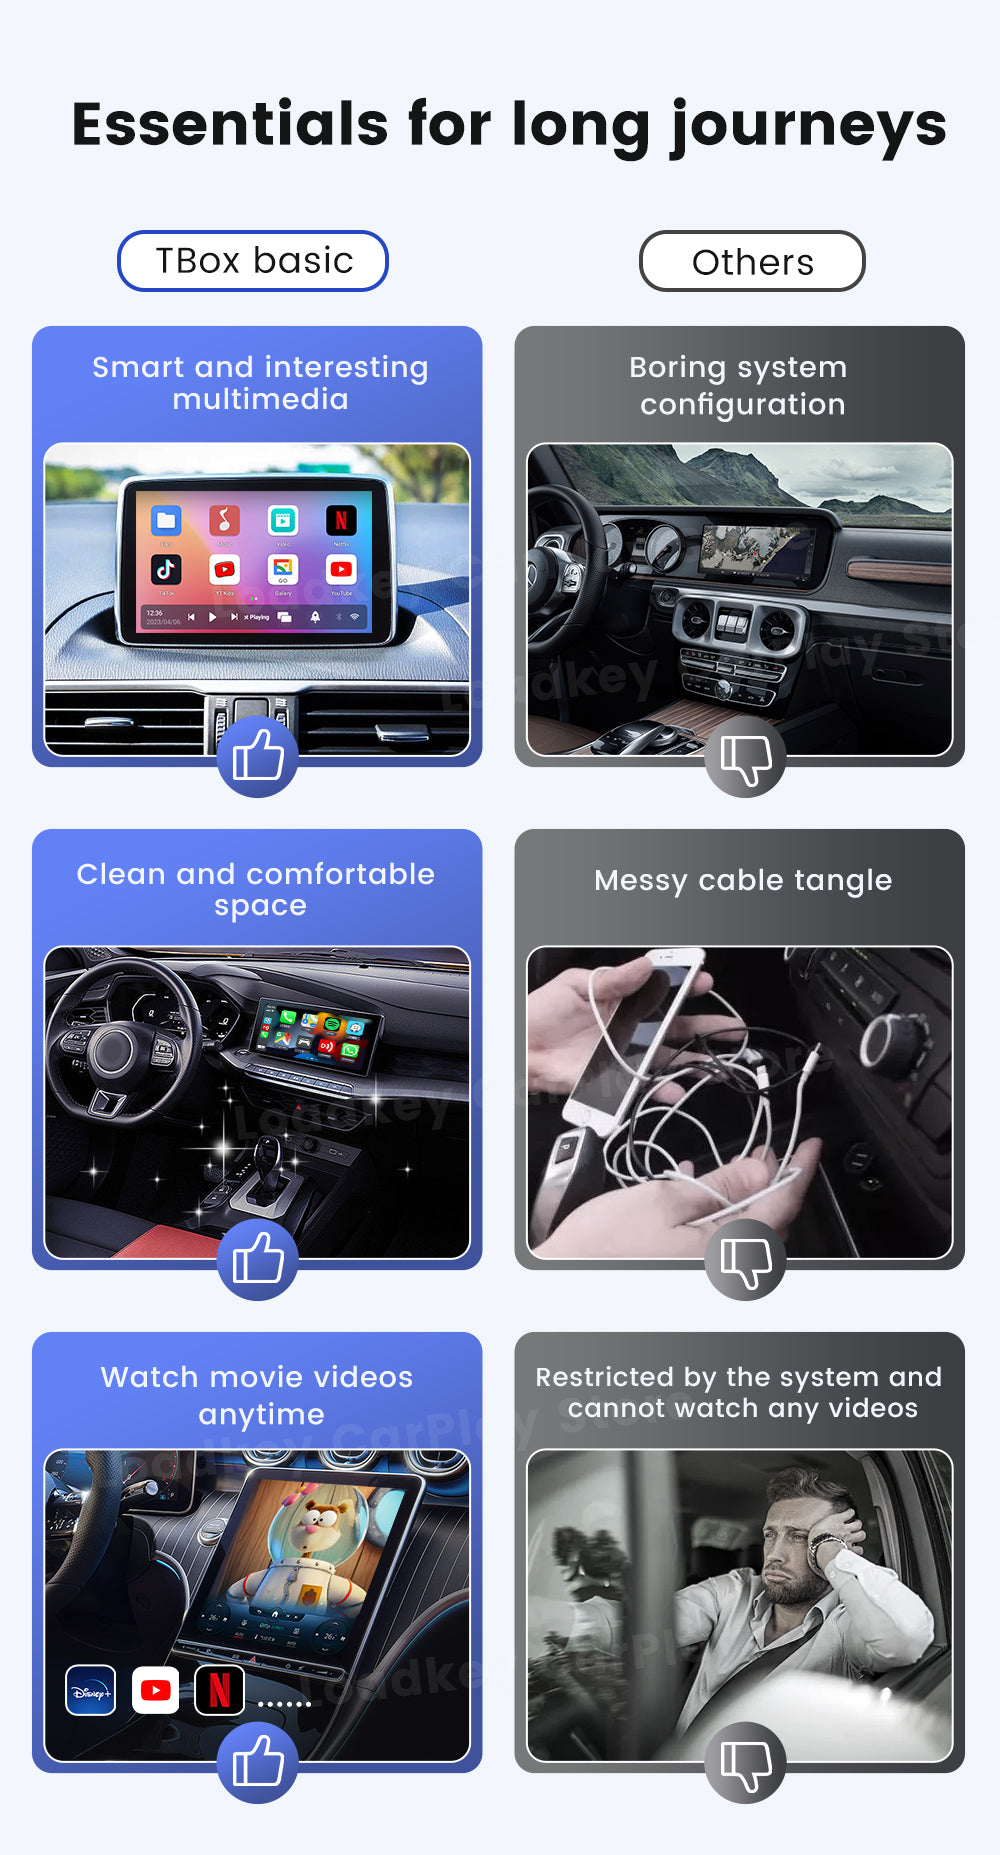 Android 11 Carlinkit Tbox Basic Netflix Ai Box Wireless Android Auto  CarPlay QCM 2290 4-Cores 2G+16G For  IPTV